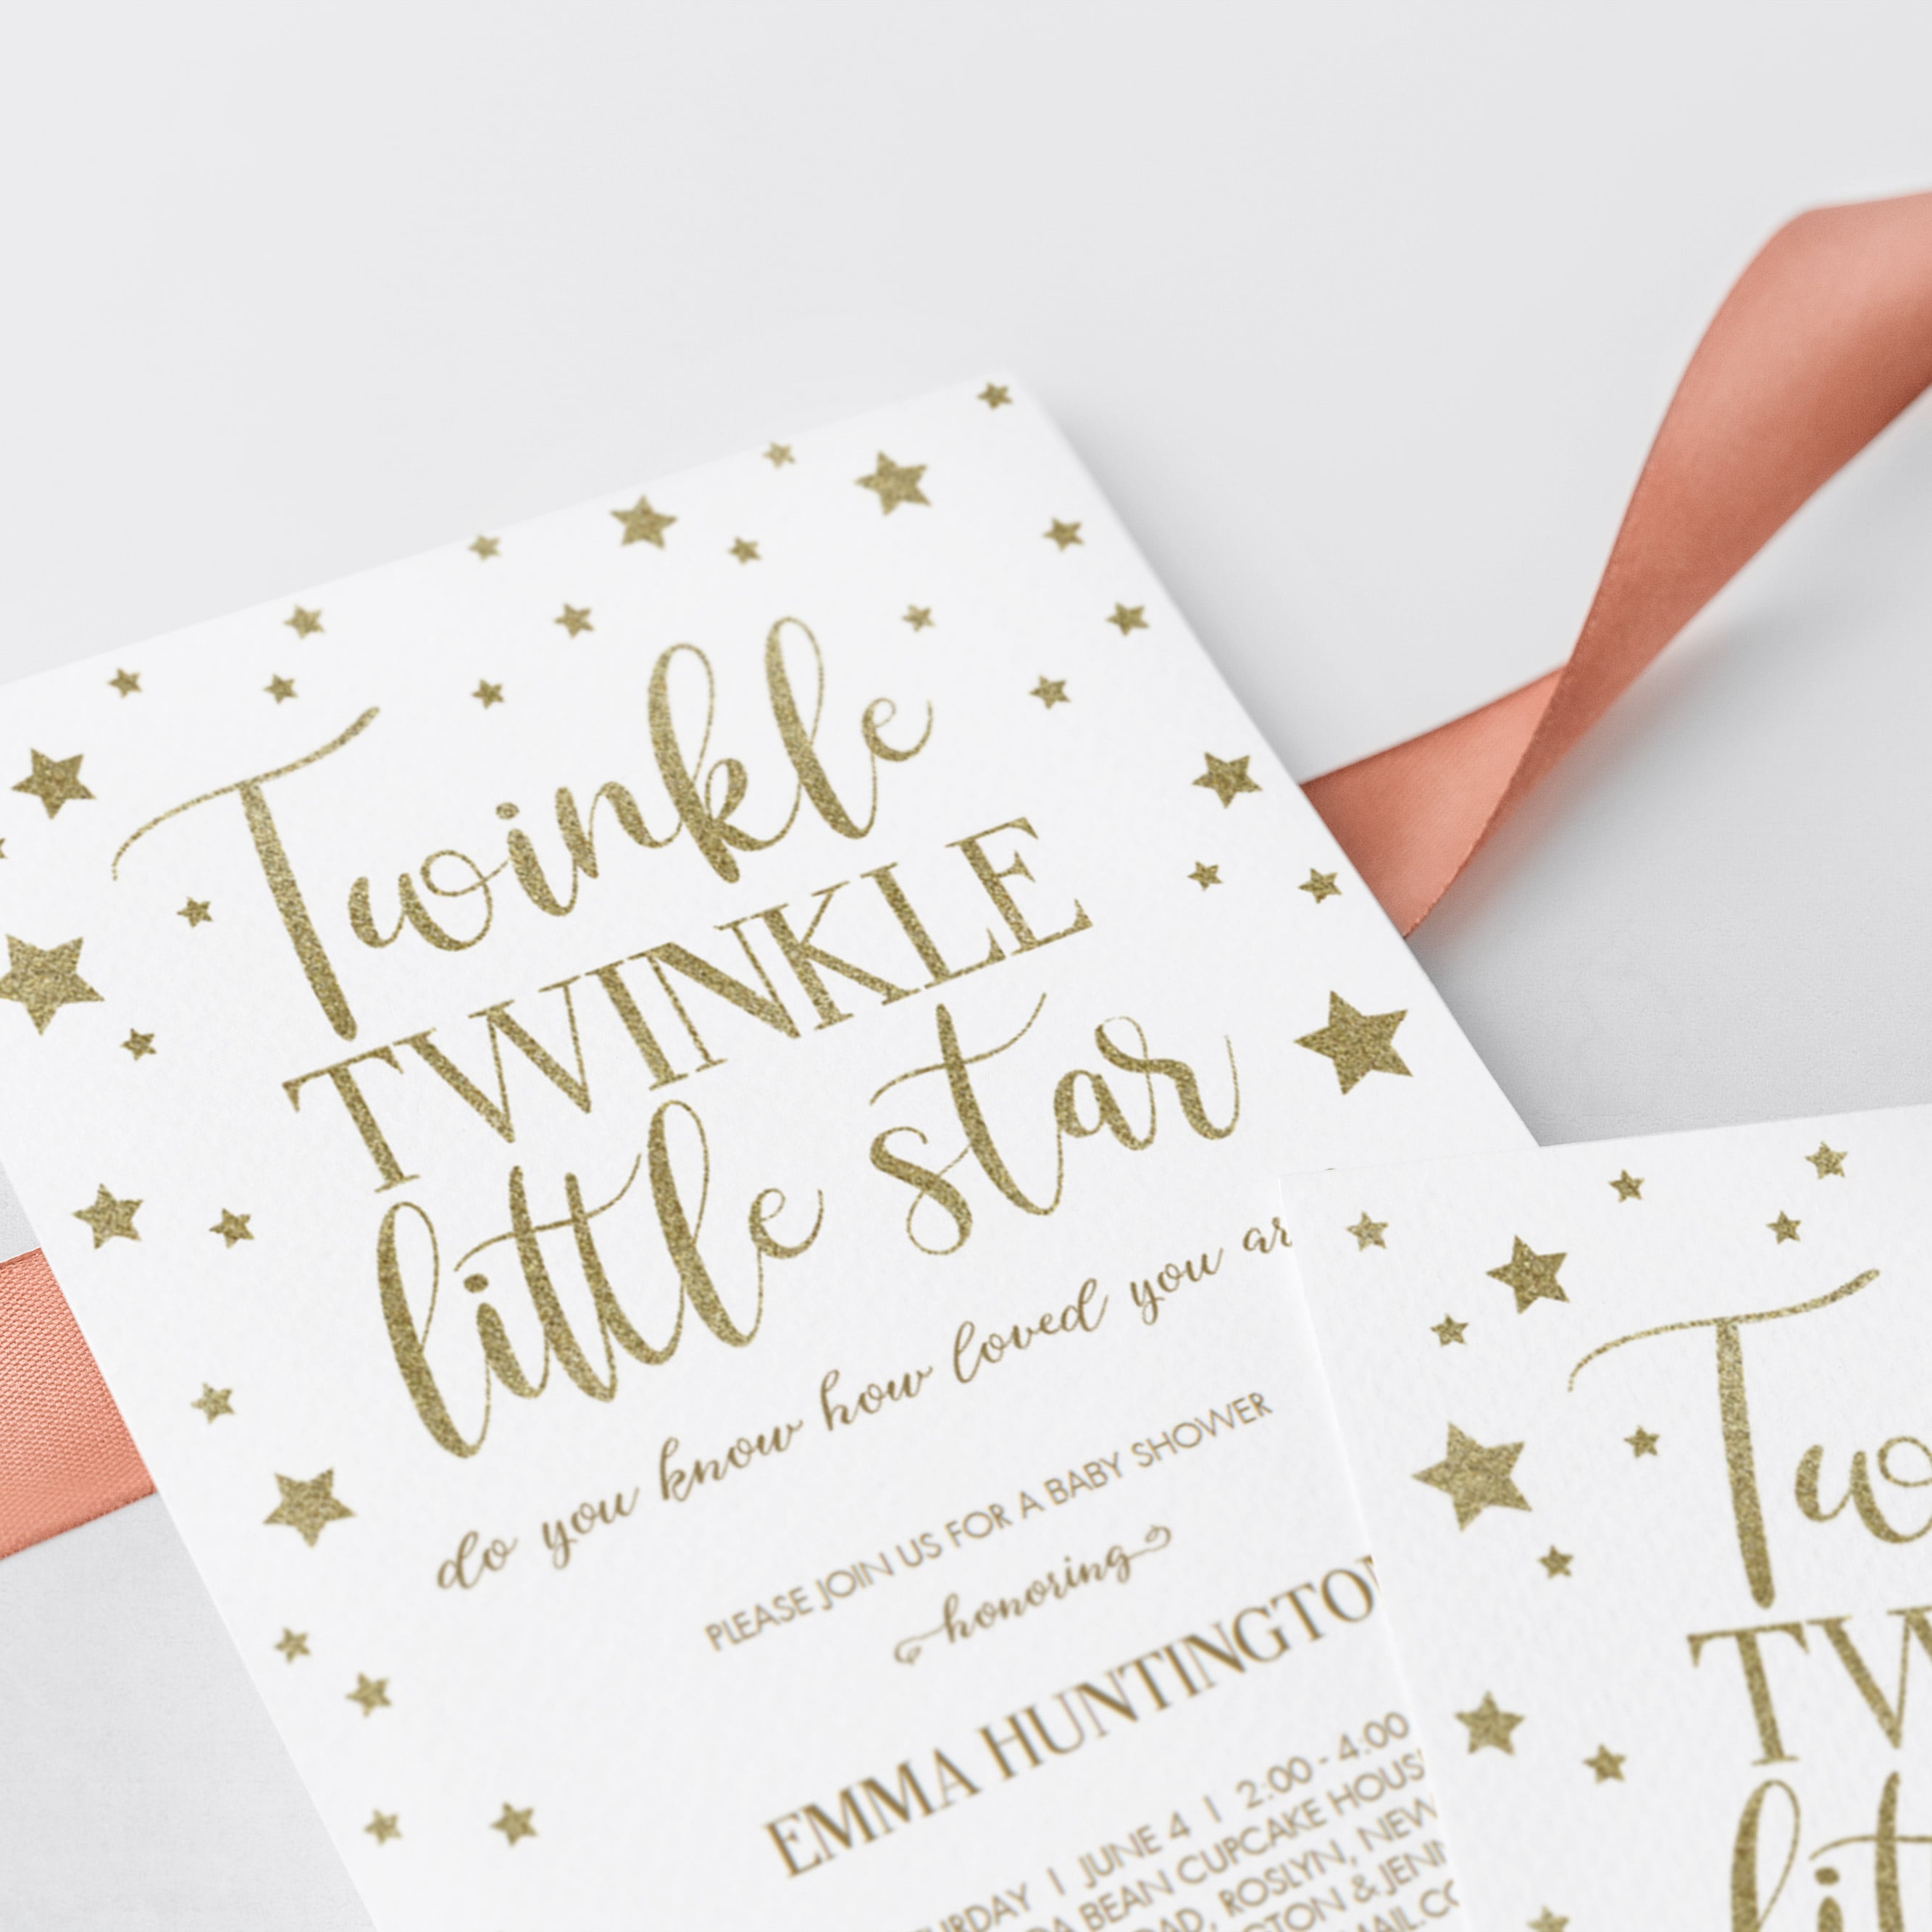 Twinkle themed baby shower invite template download PDF by LittleSizzle